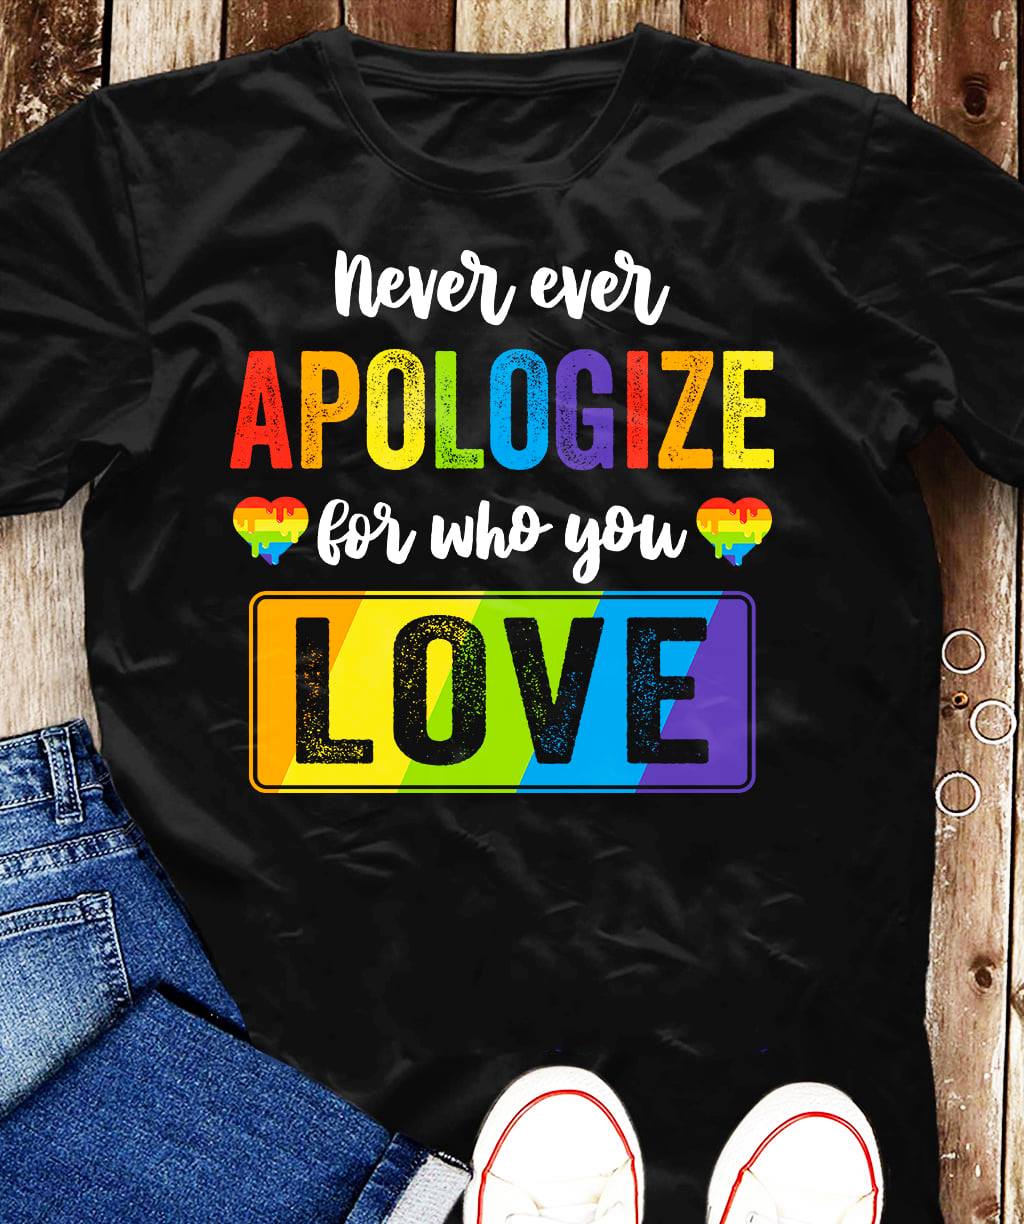 Never ever apologize for who you love - Lgbt community